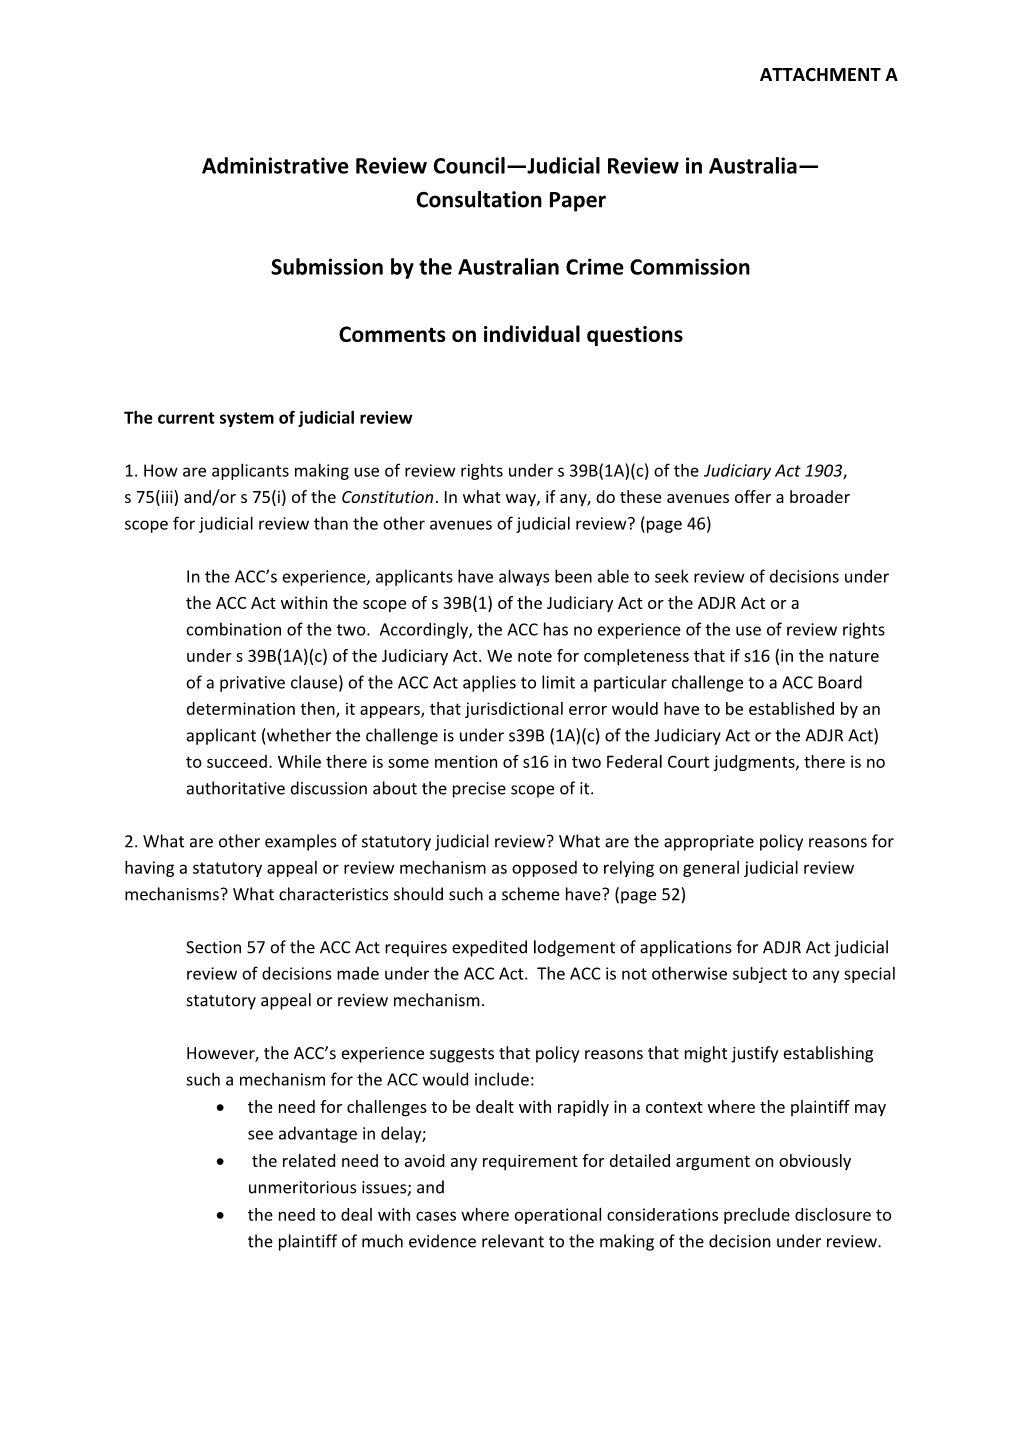 Administrative Review Council Judicial Review in Australia